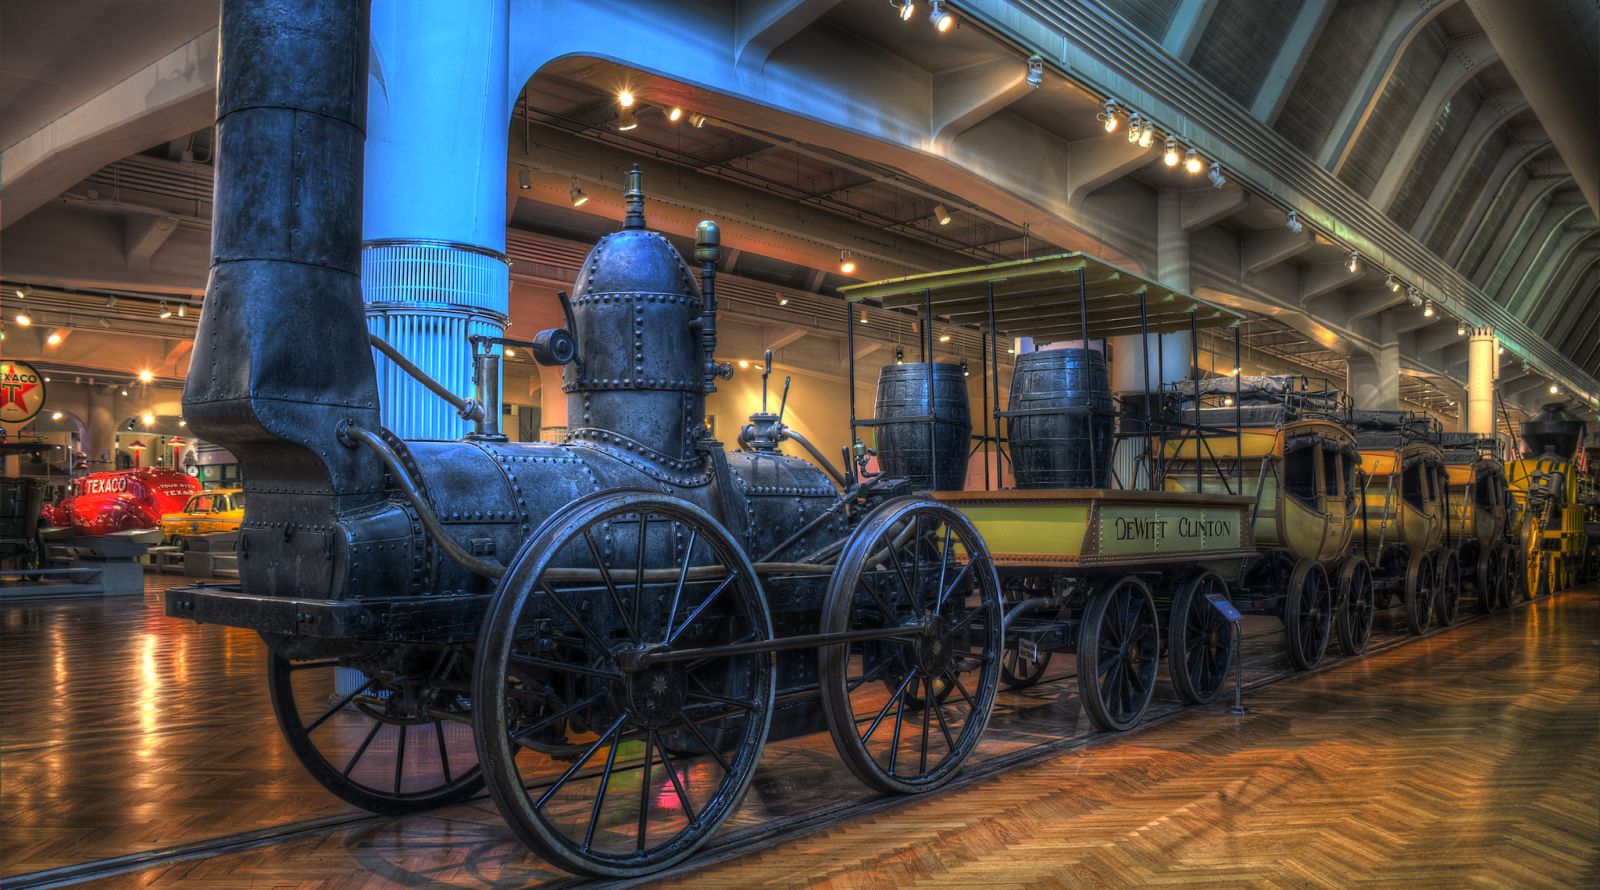 The replica in the Henry Ford Museum